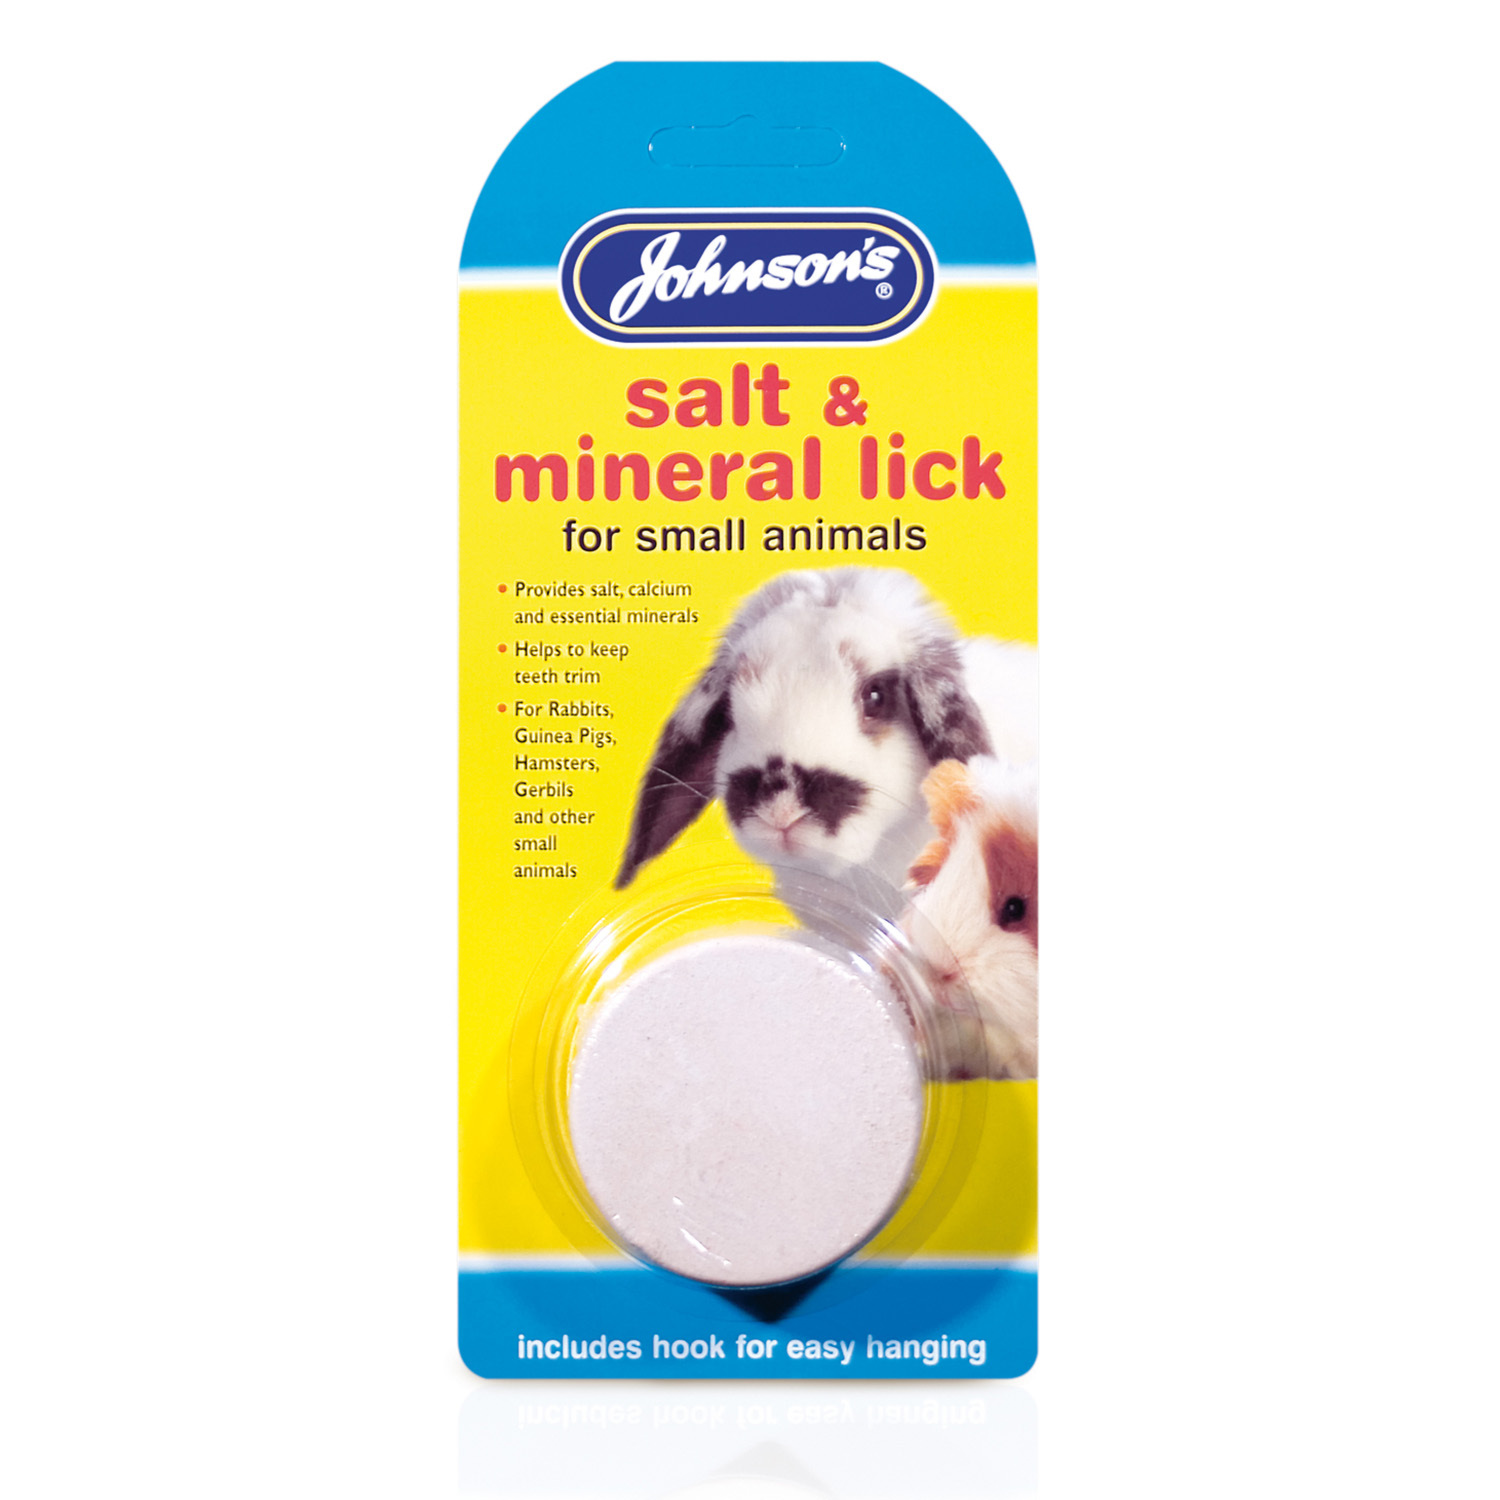 Johnson's Salt and Mineral Lick for Small Animals Image